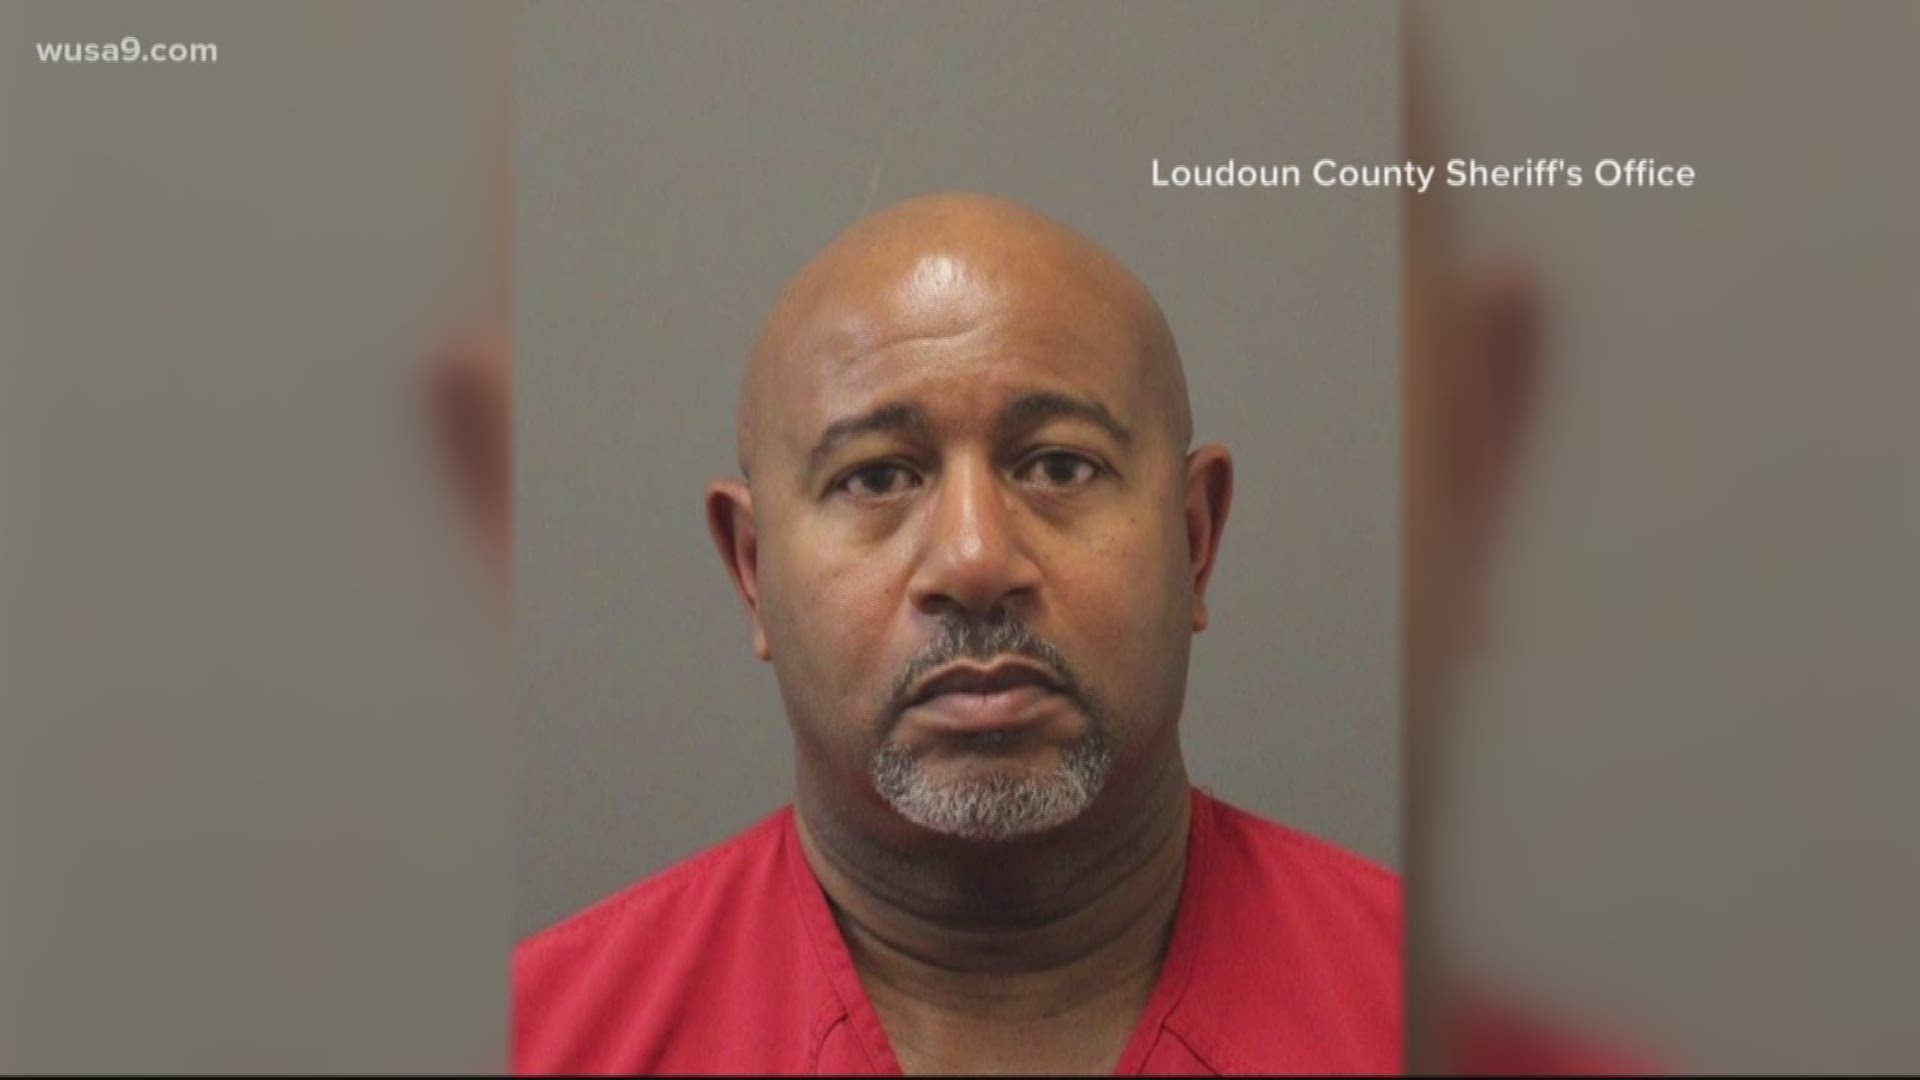 Arnold D. Thomas, 54, is charged with aggravated sexual battery, taking indecent liberties with a child, and abduction.